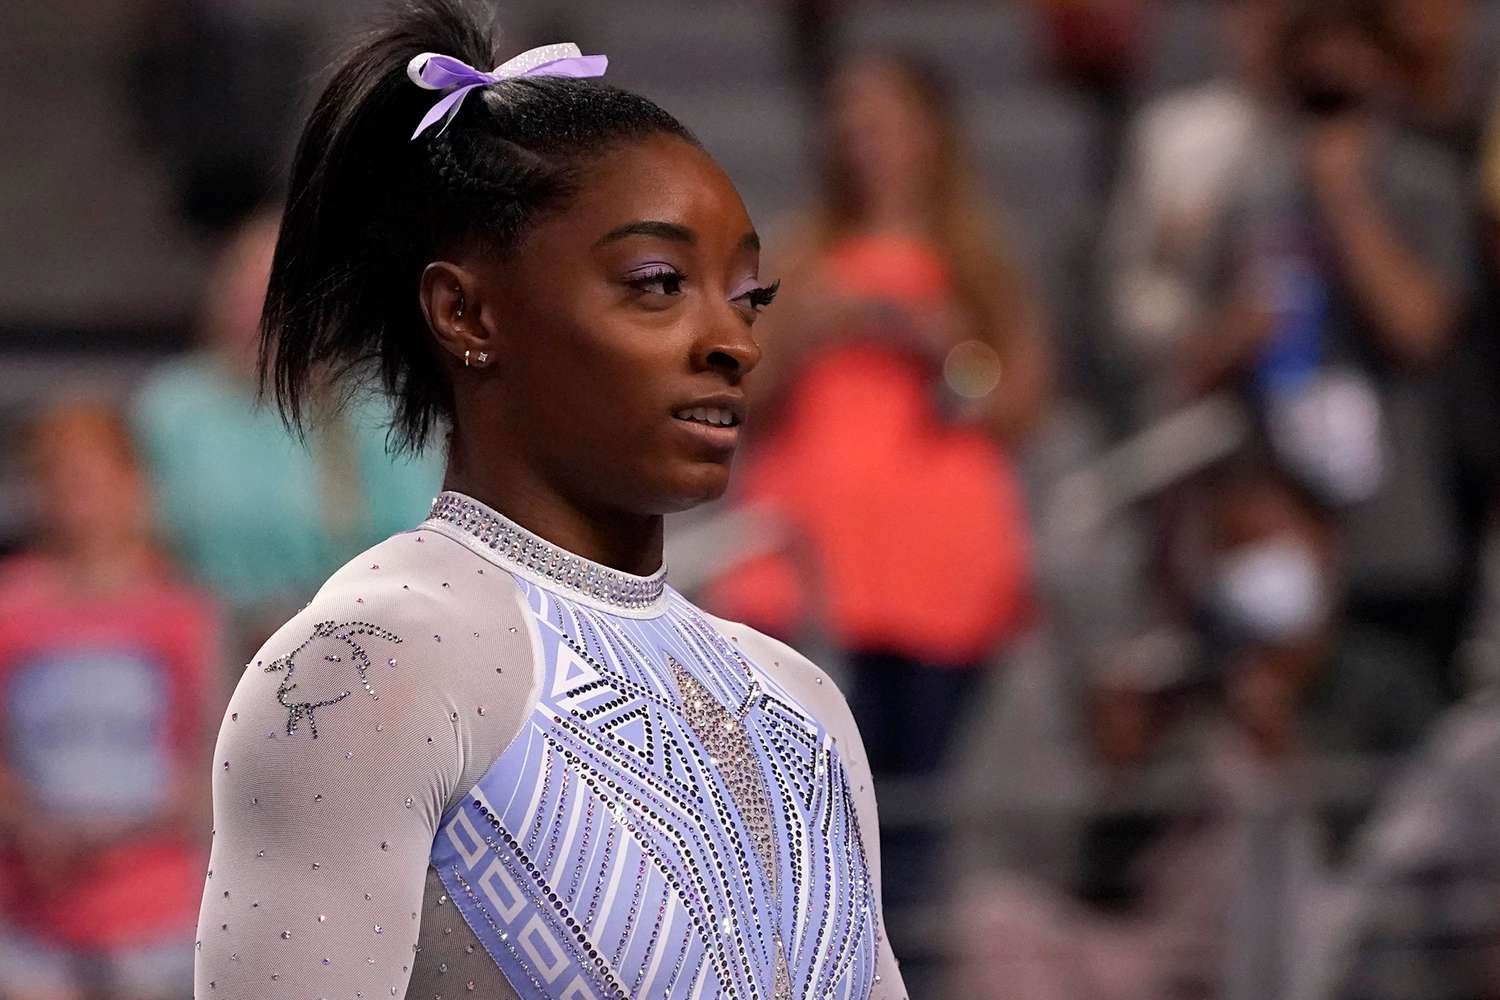 Simone Biles Says She Wears a Goat on Leotard to 'Hit Back at the Haters'